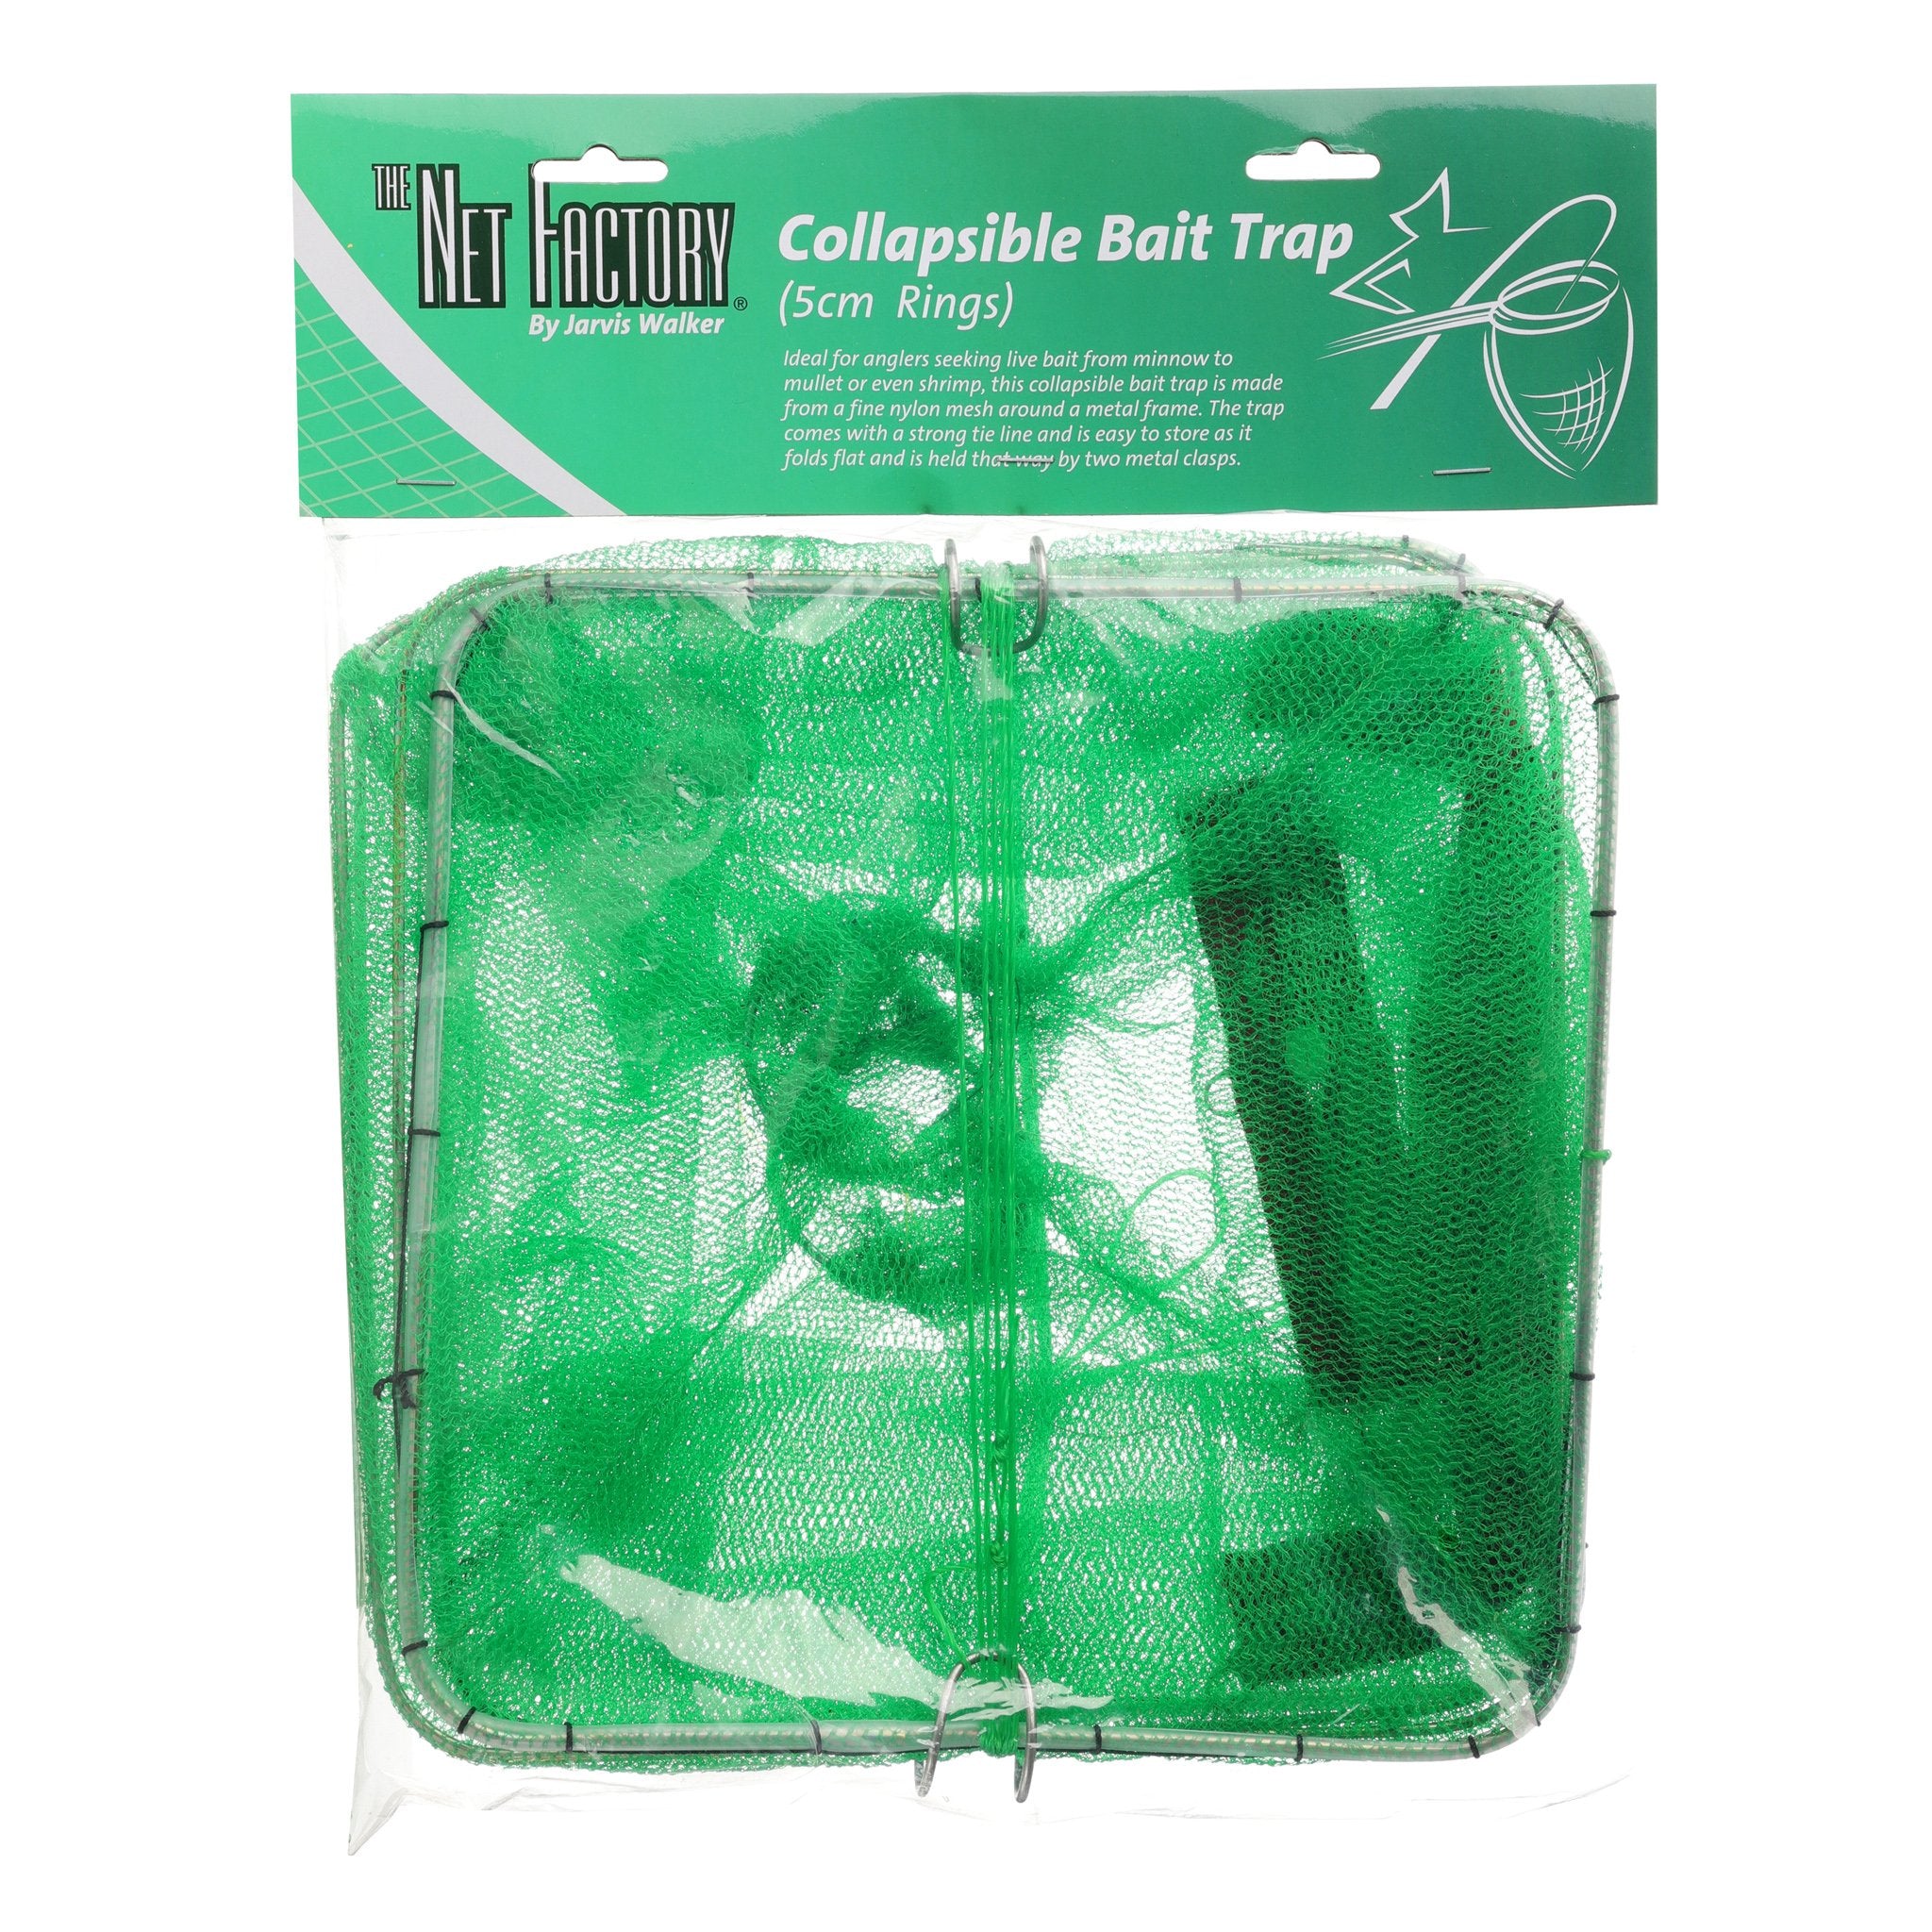 Net Factory Collapsible Bait Trap Green - 2 rings - Jarvis Walker